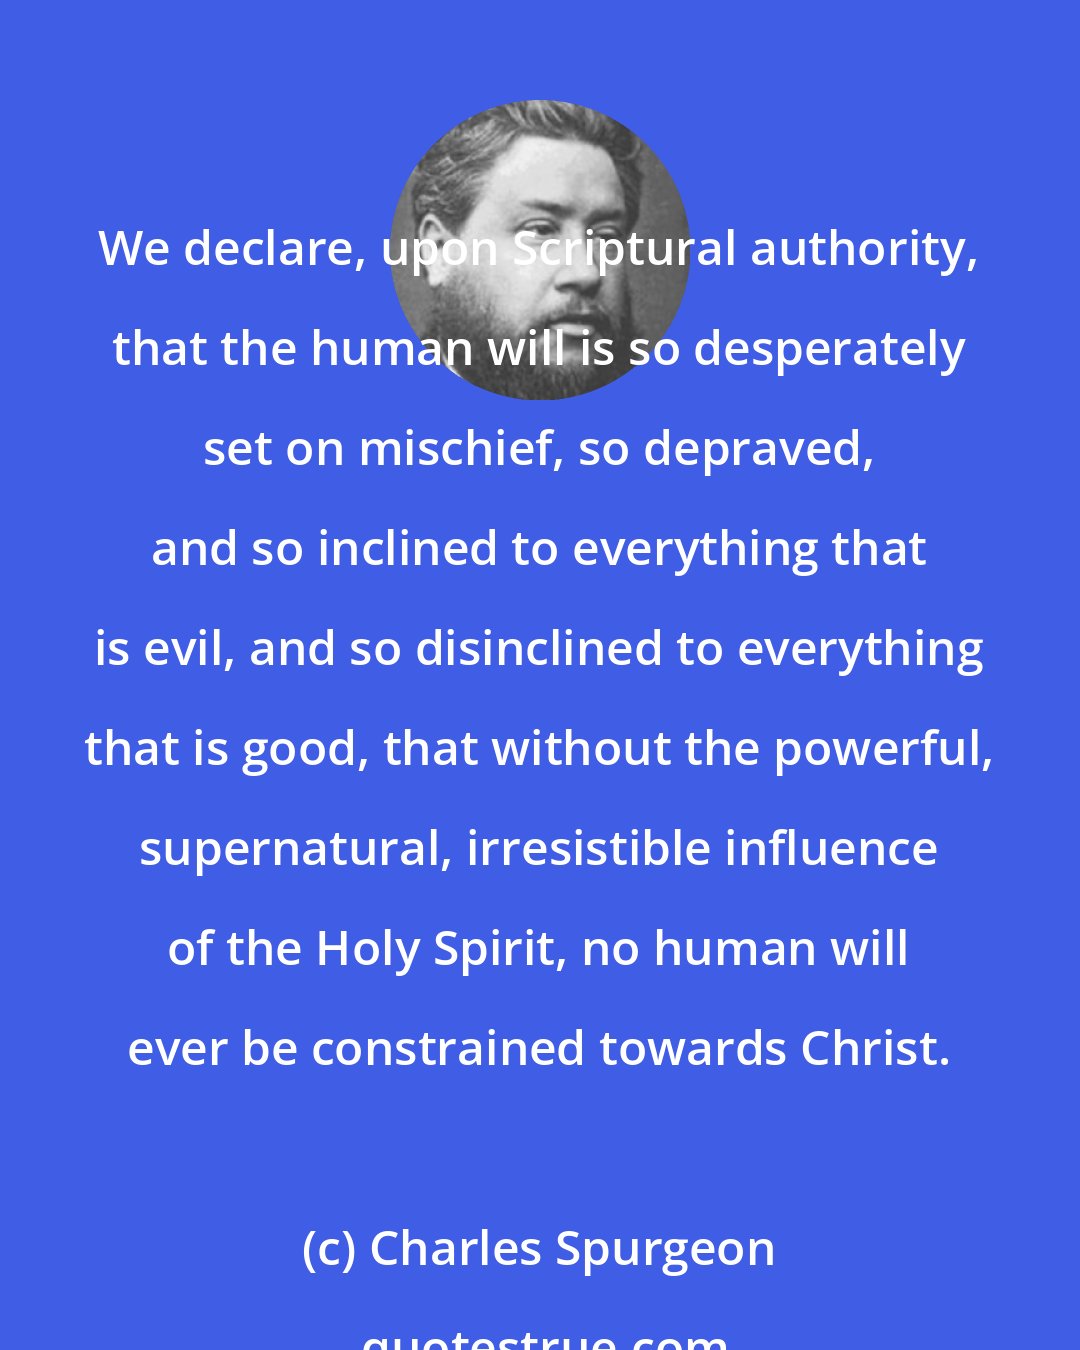 Charles Spurgeon: We declare, upon Scriptural authority, that the human will is so desperately set on mischief, so depraved, and so inclined to everything that is evil, and so disinclined to everything that is good, that without the powerful, supernatural, irresistible influence of the Holy Spirit, no human will ever be constrained towards Christ.